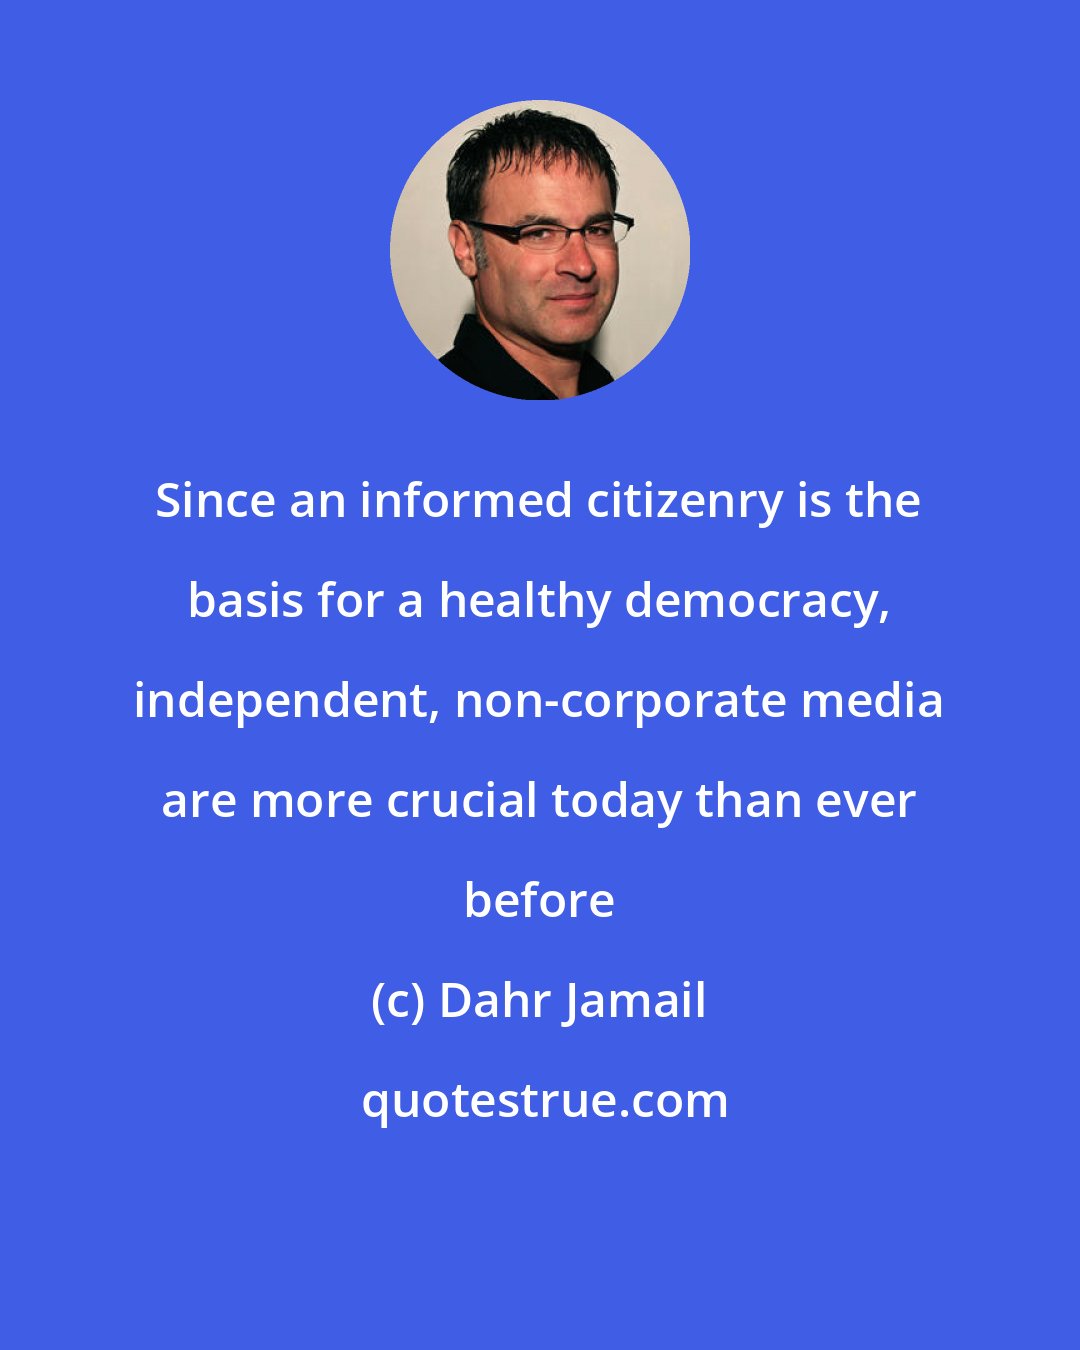 Dahr Jamail: Since an informed citizenry is the basis for a healthy democracy, independent, non-corporate media are more crucial today than ever before